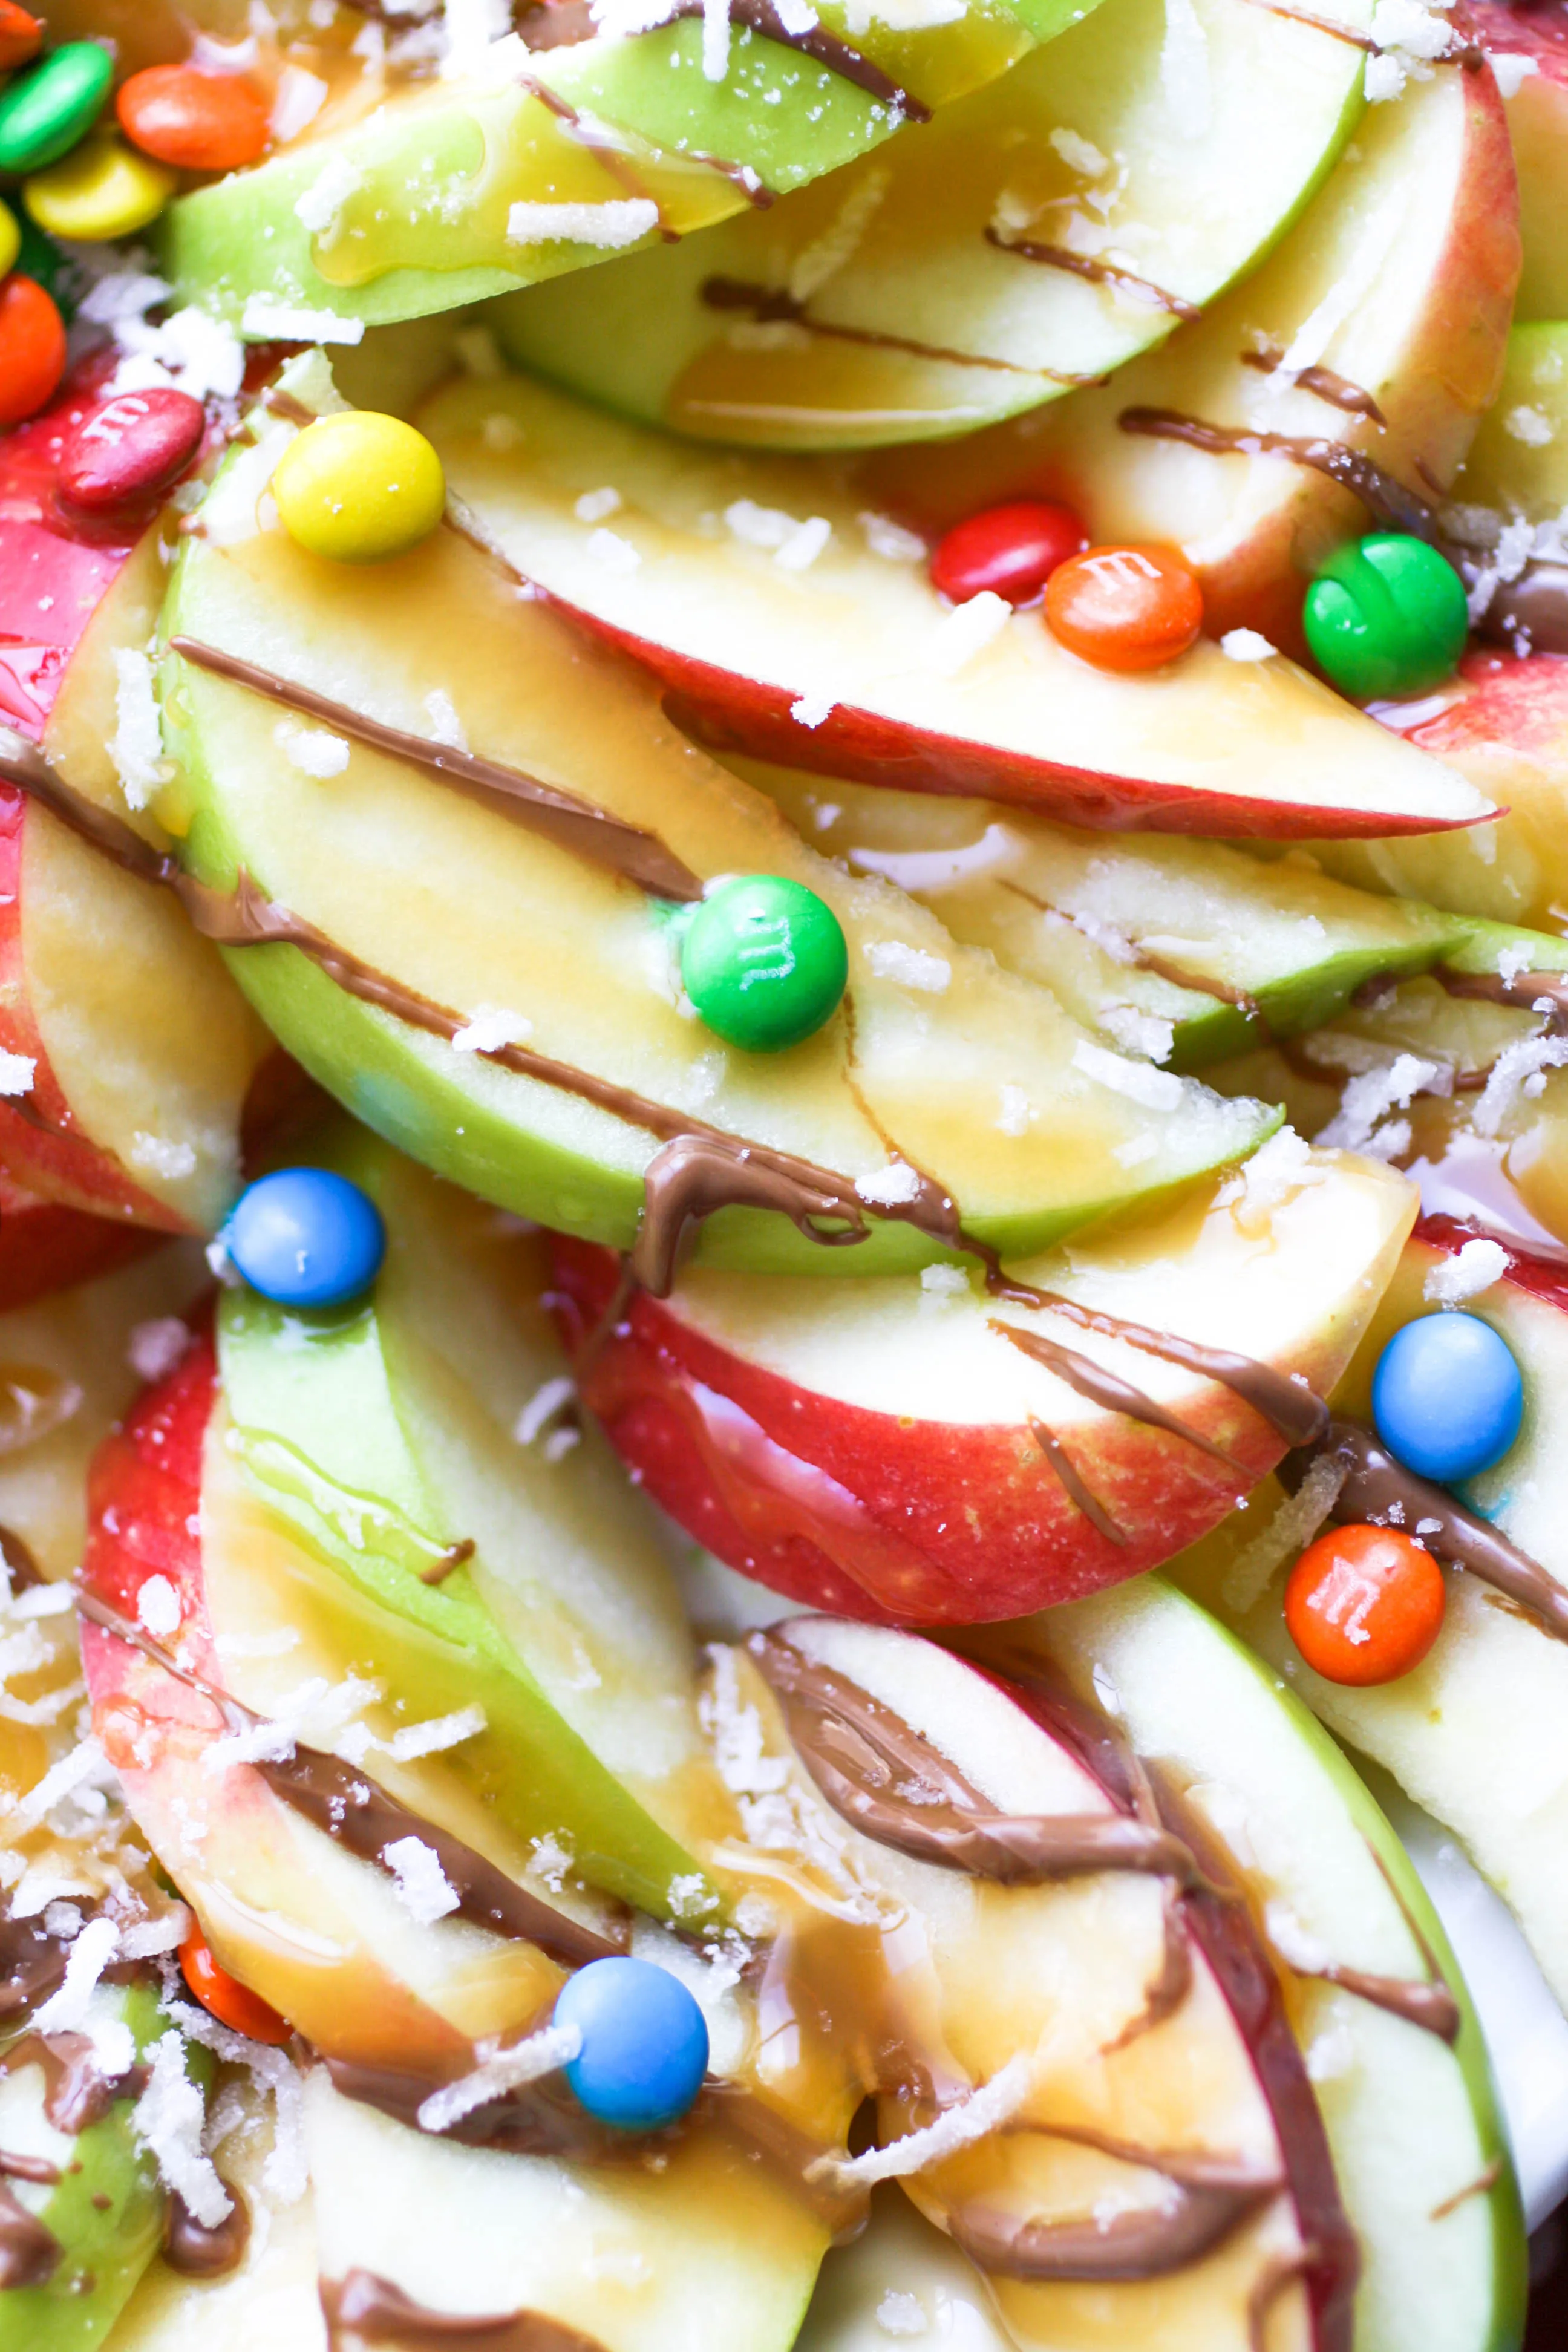 Apple nachos with chocolate & caramel drizzle are a simple, tasty treat for any day! Everyone will love these 